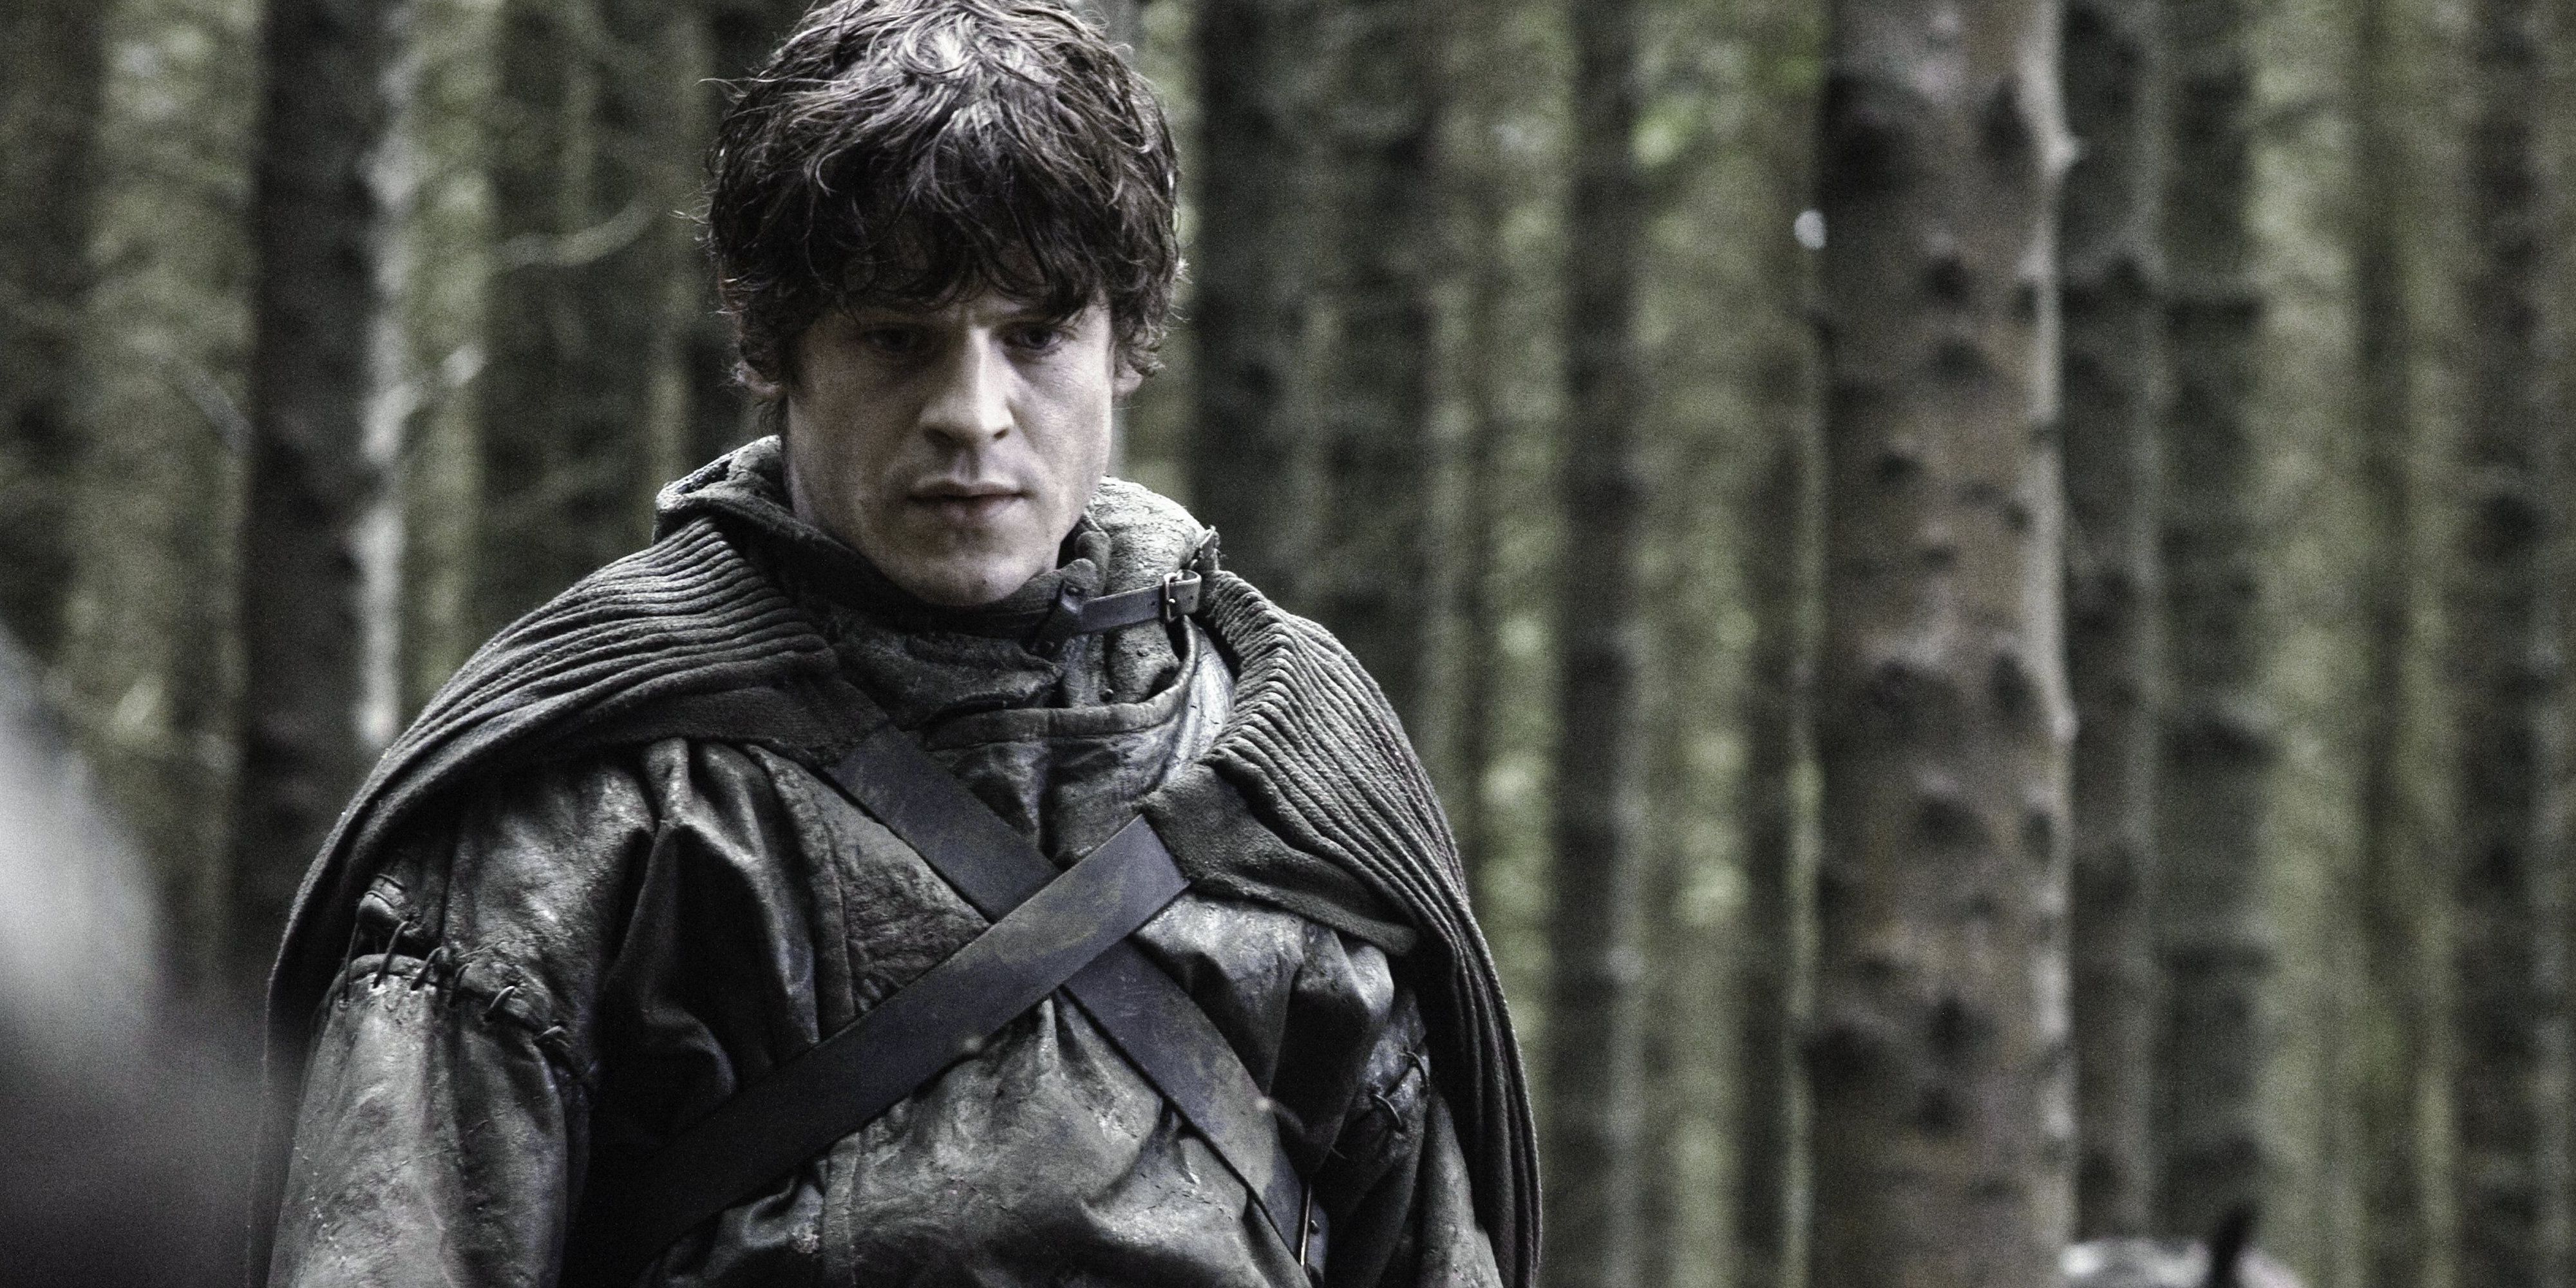 Ramsay Bolton in the forest in Game of Thrones